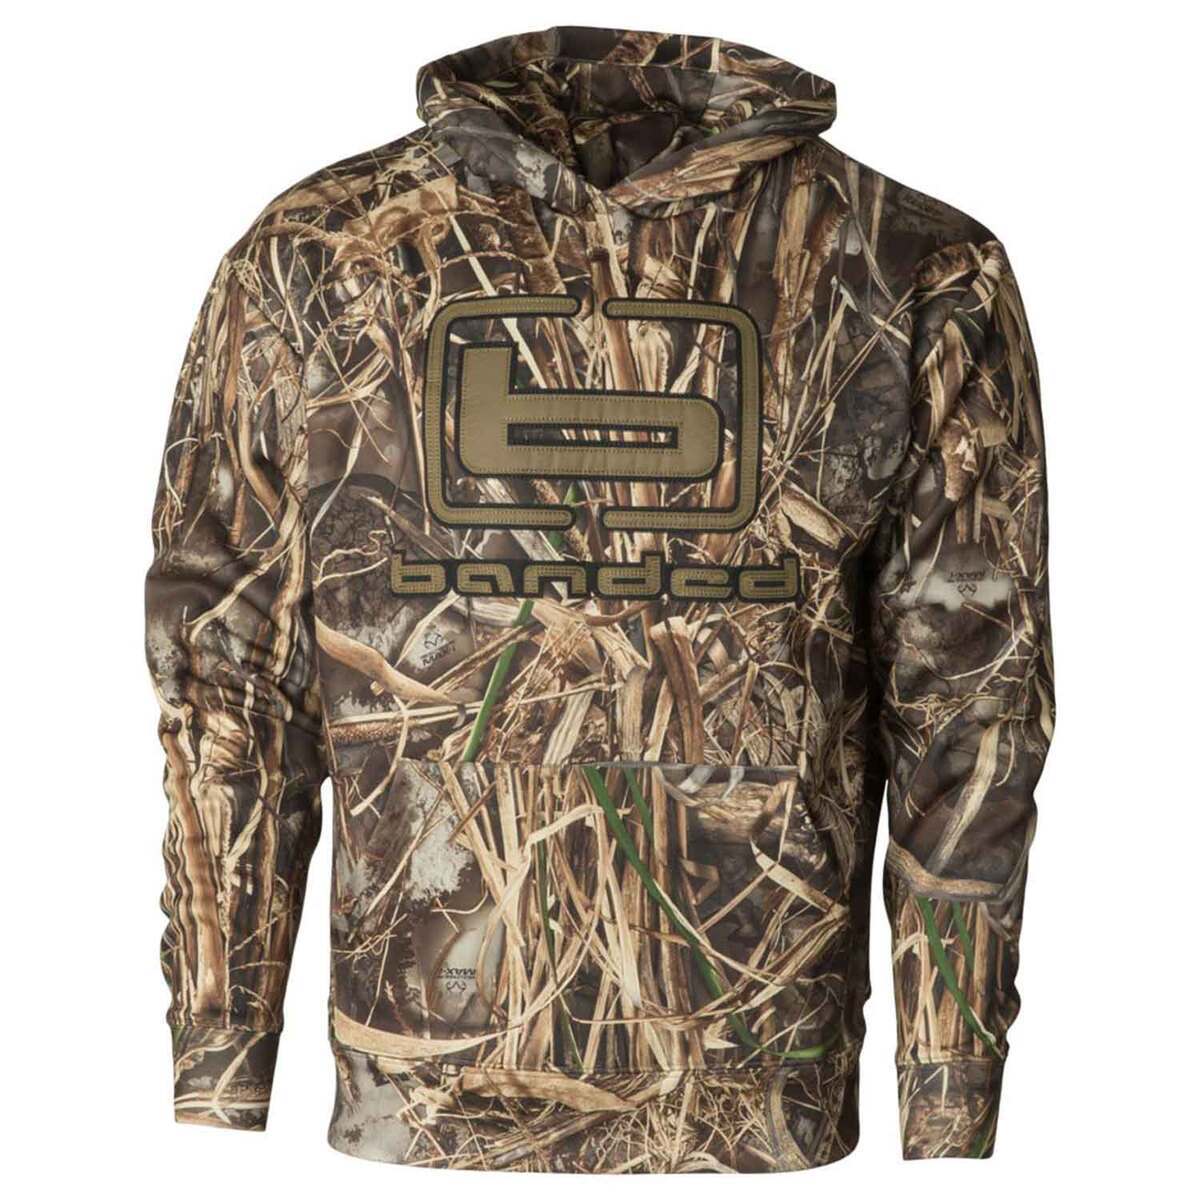  Realtree Men's Ultra-Soft Camo Hoodie Shirt Long Sleeve  Lightweight for for Fishing, Running, Hiking, or Camping : Sports & Outdoors